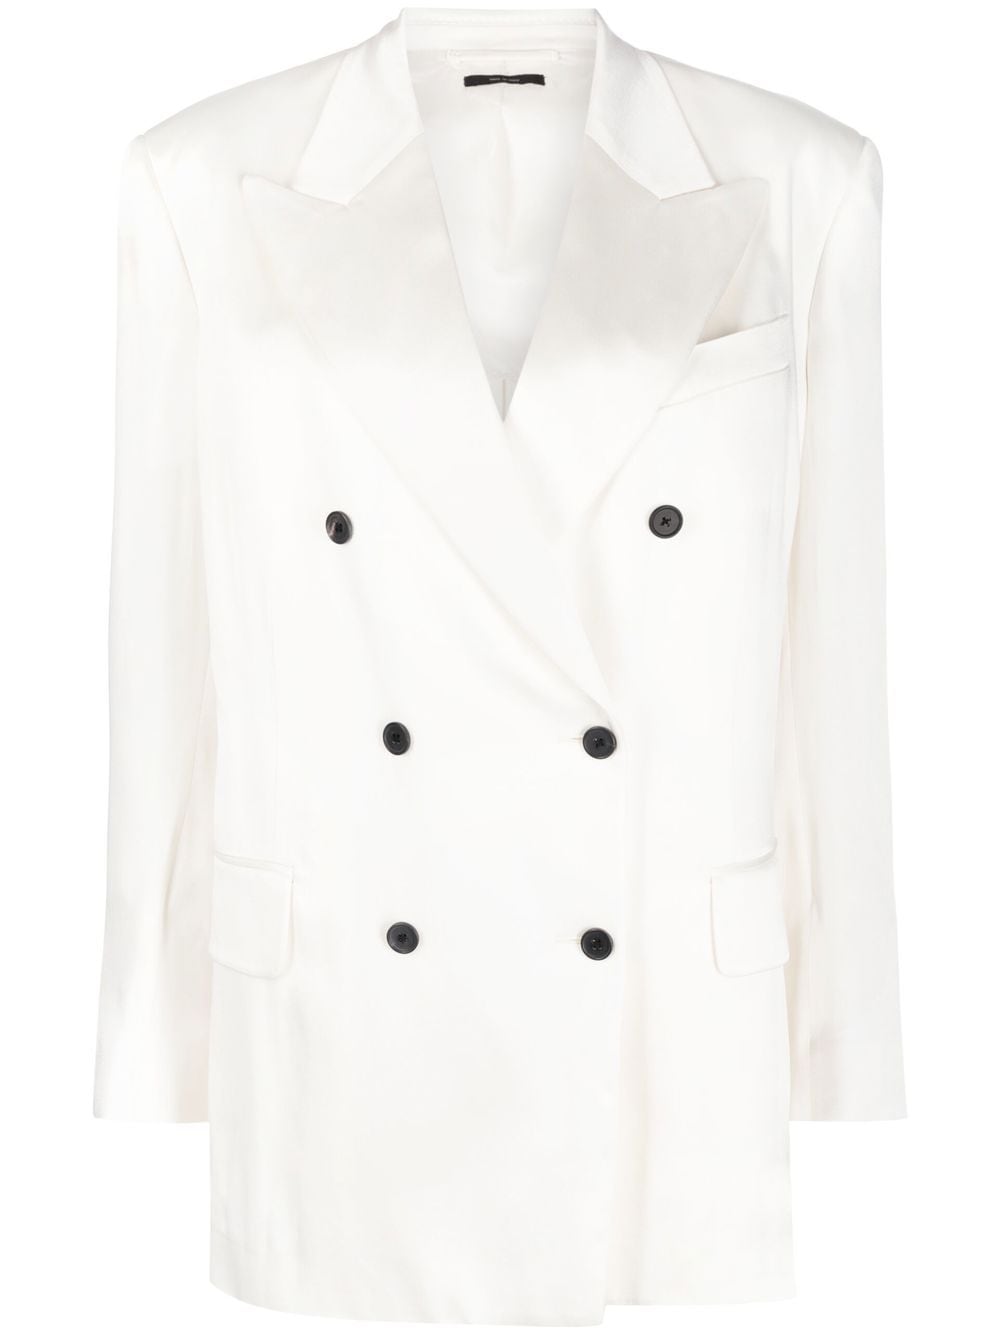 TOM FORD double-breasted blazer - White von TOM FORD